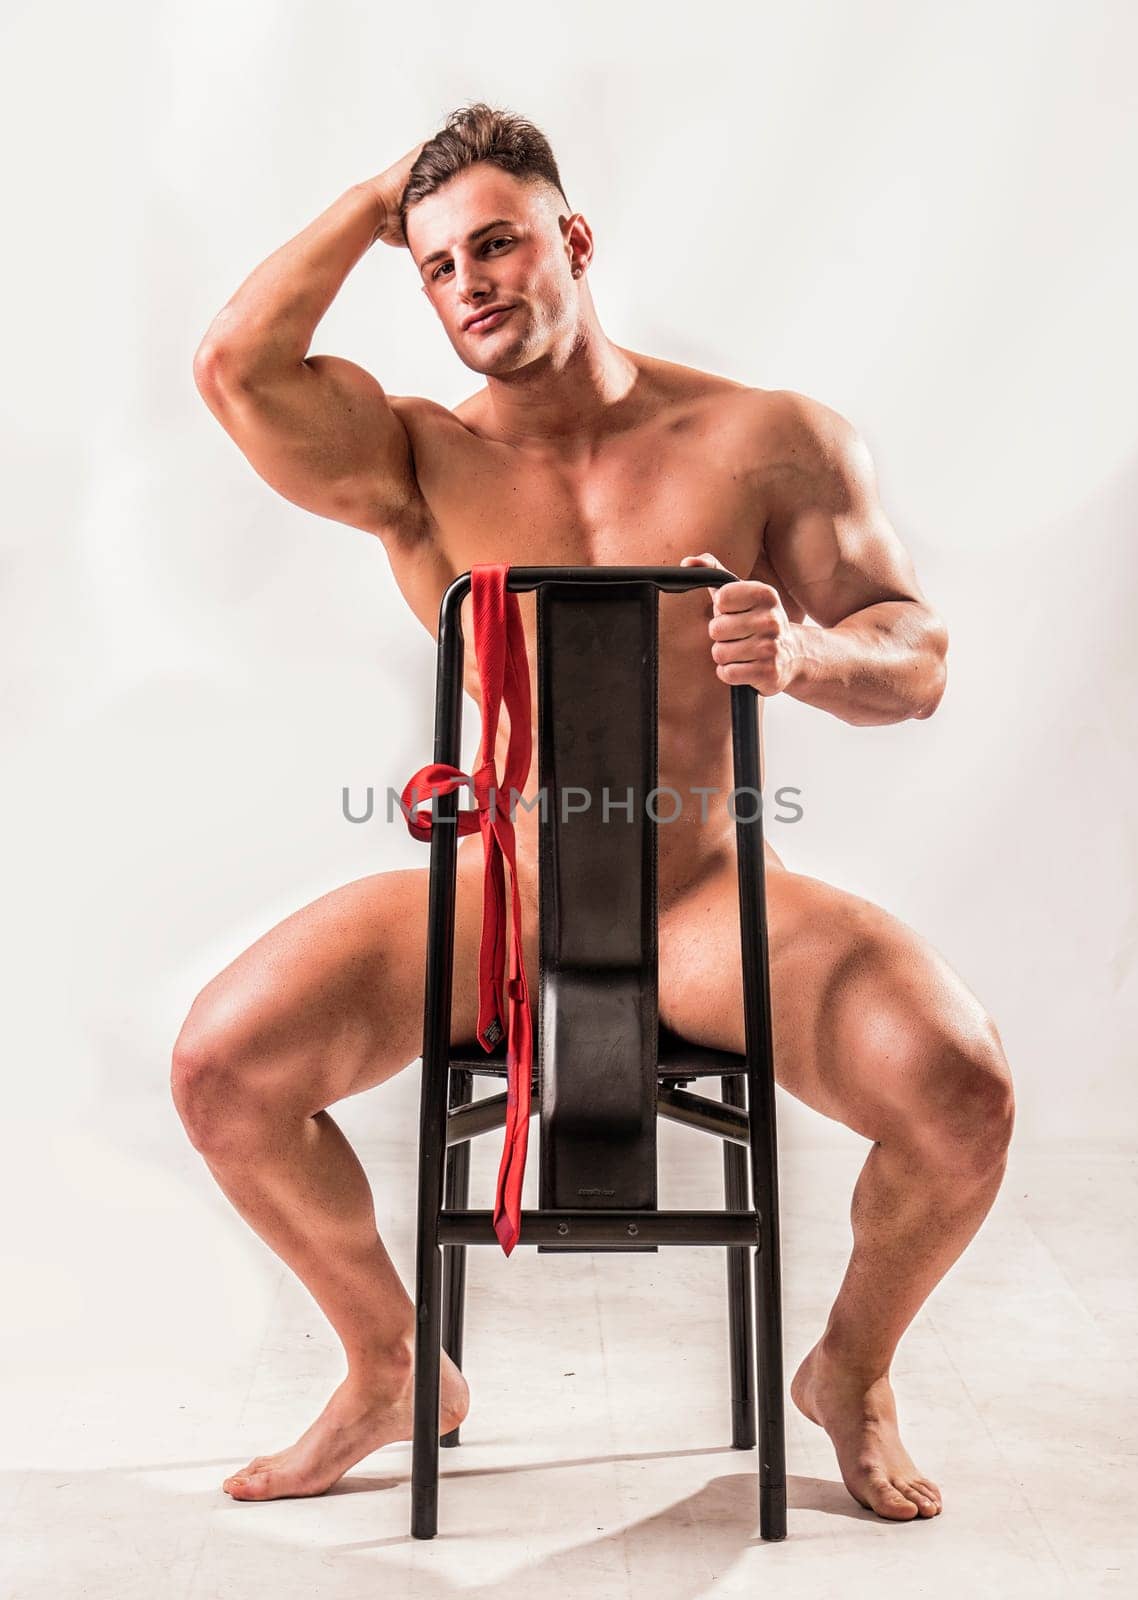 Muscular bodybuilder sitting on chair, totally naked, looking at camera